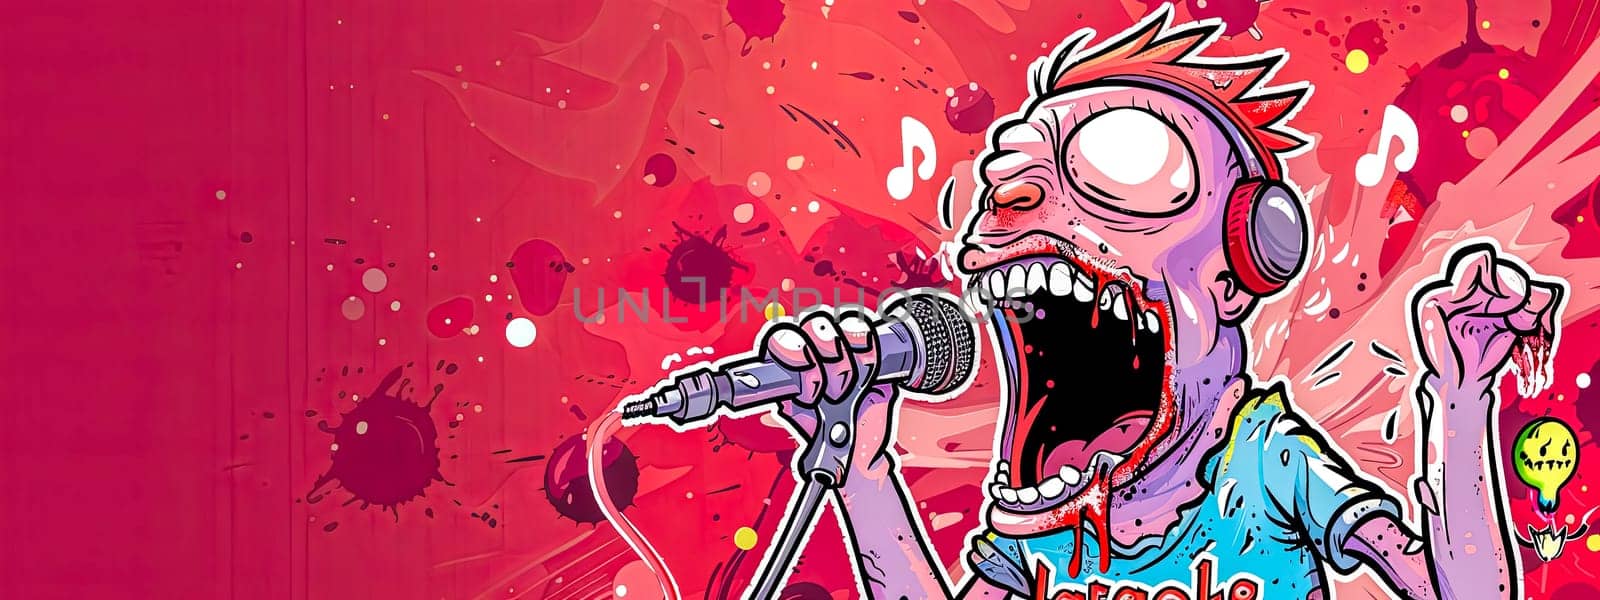 Vibrant cartoon of a rockstar singing into a microphone with dynamic background by Edophoto